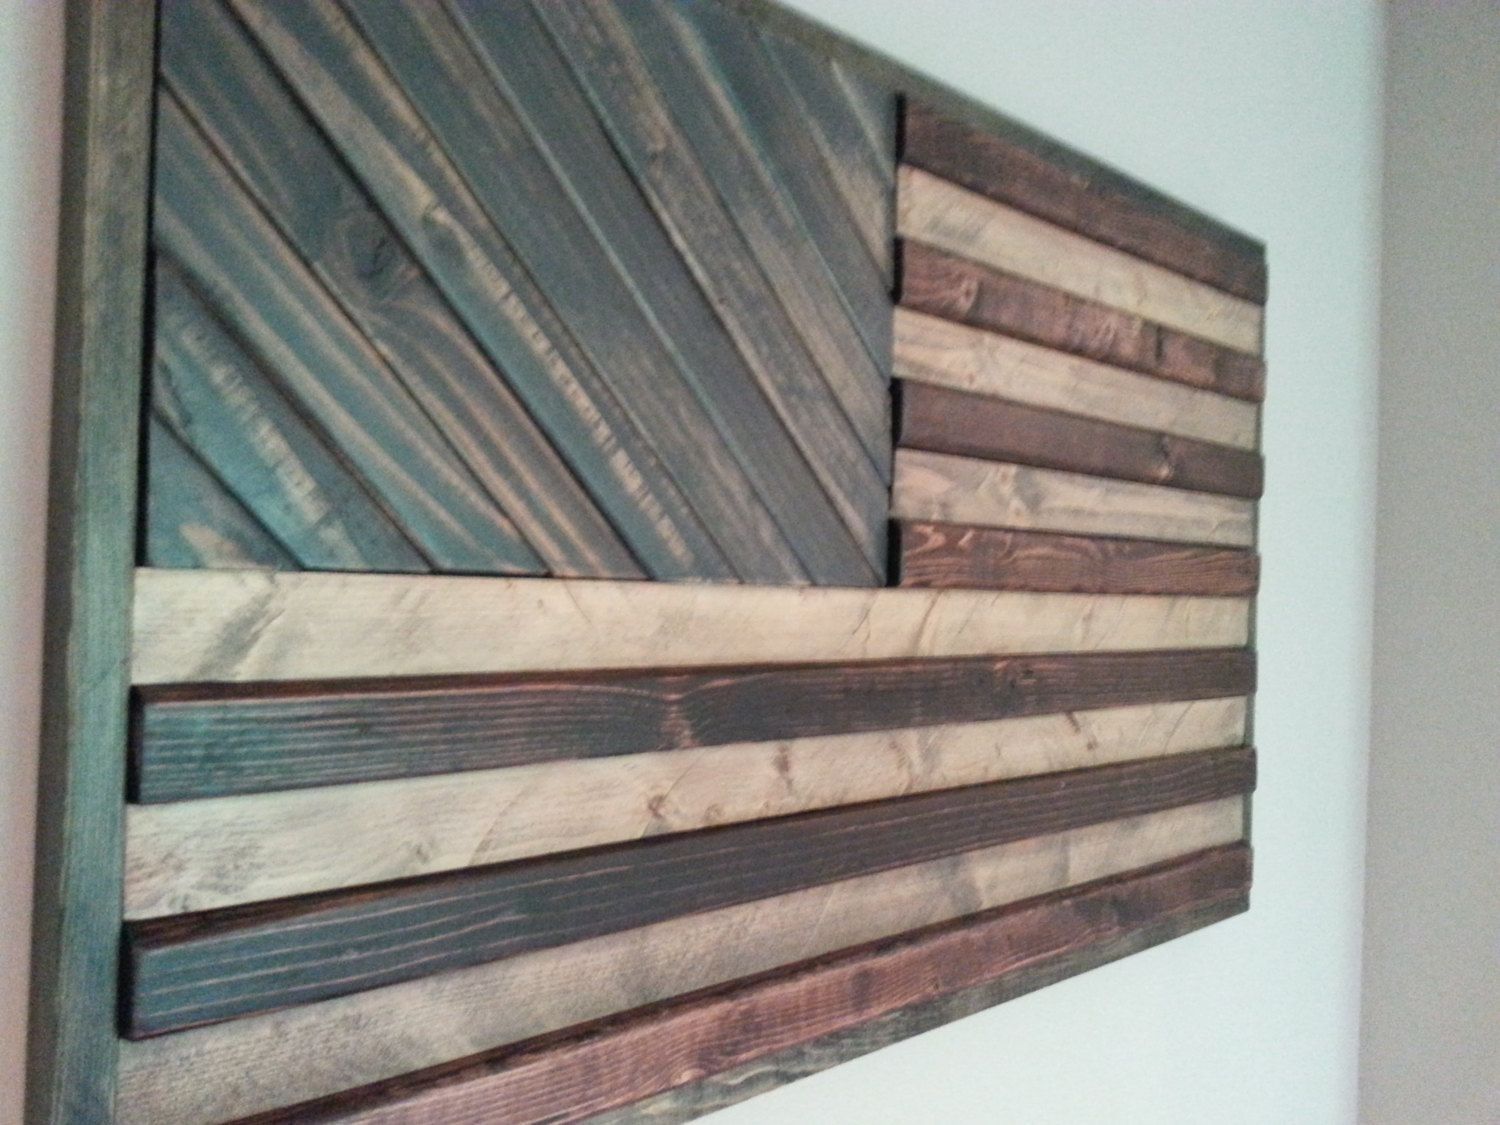 American Flag Theme Wood Wall Artweatheredwoodwalls On Etsy Intended For Wooden American Flag Wall Art (View 14 of 20)